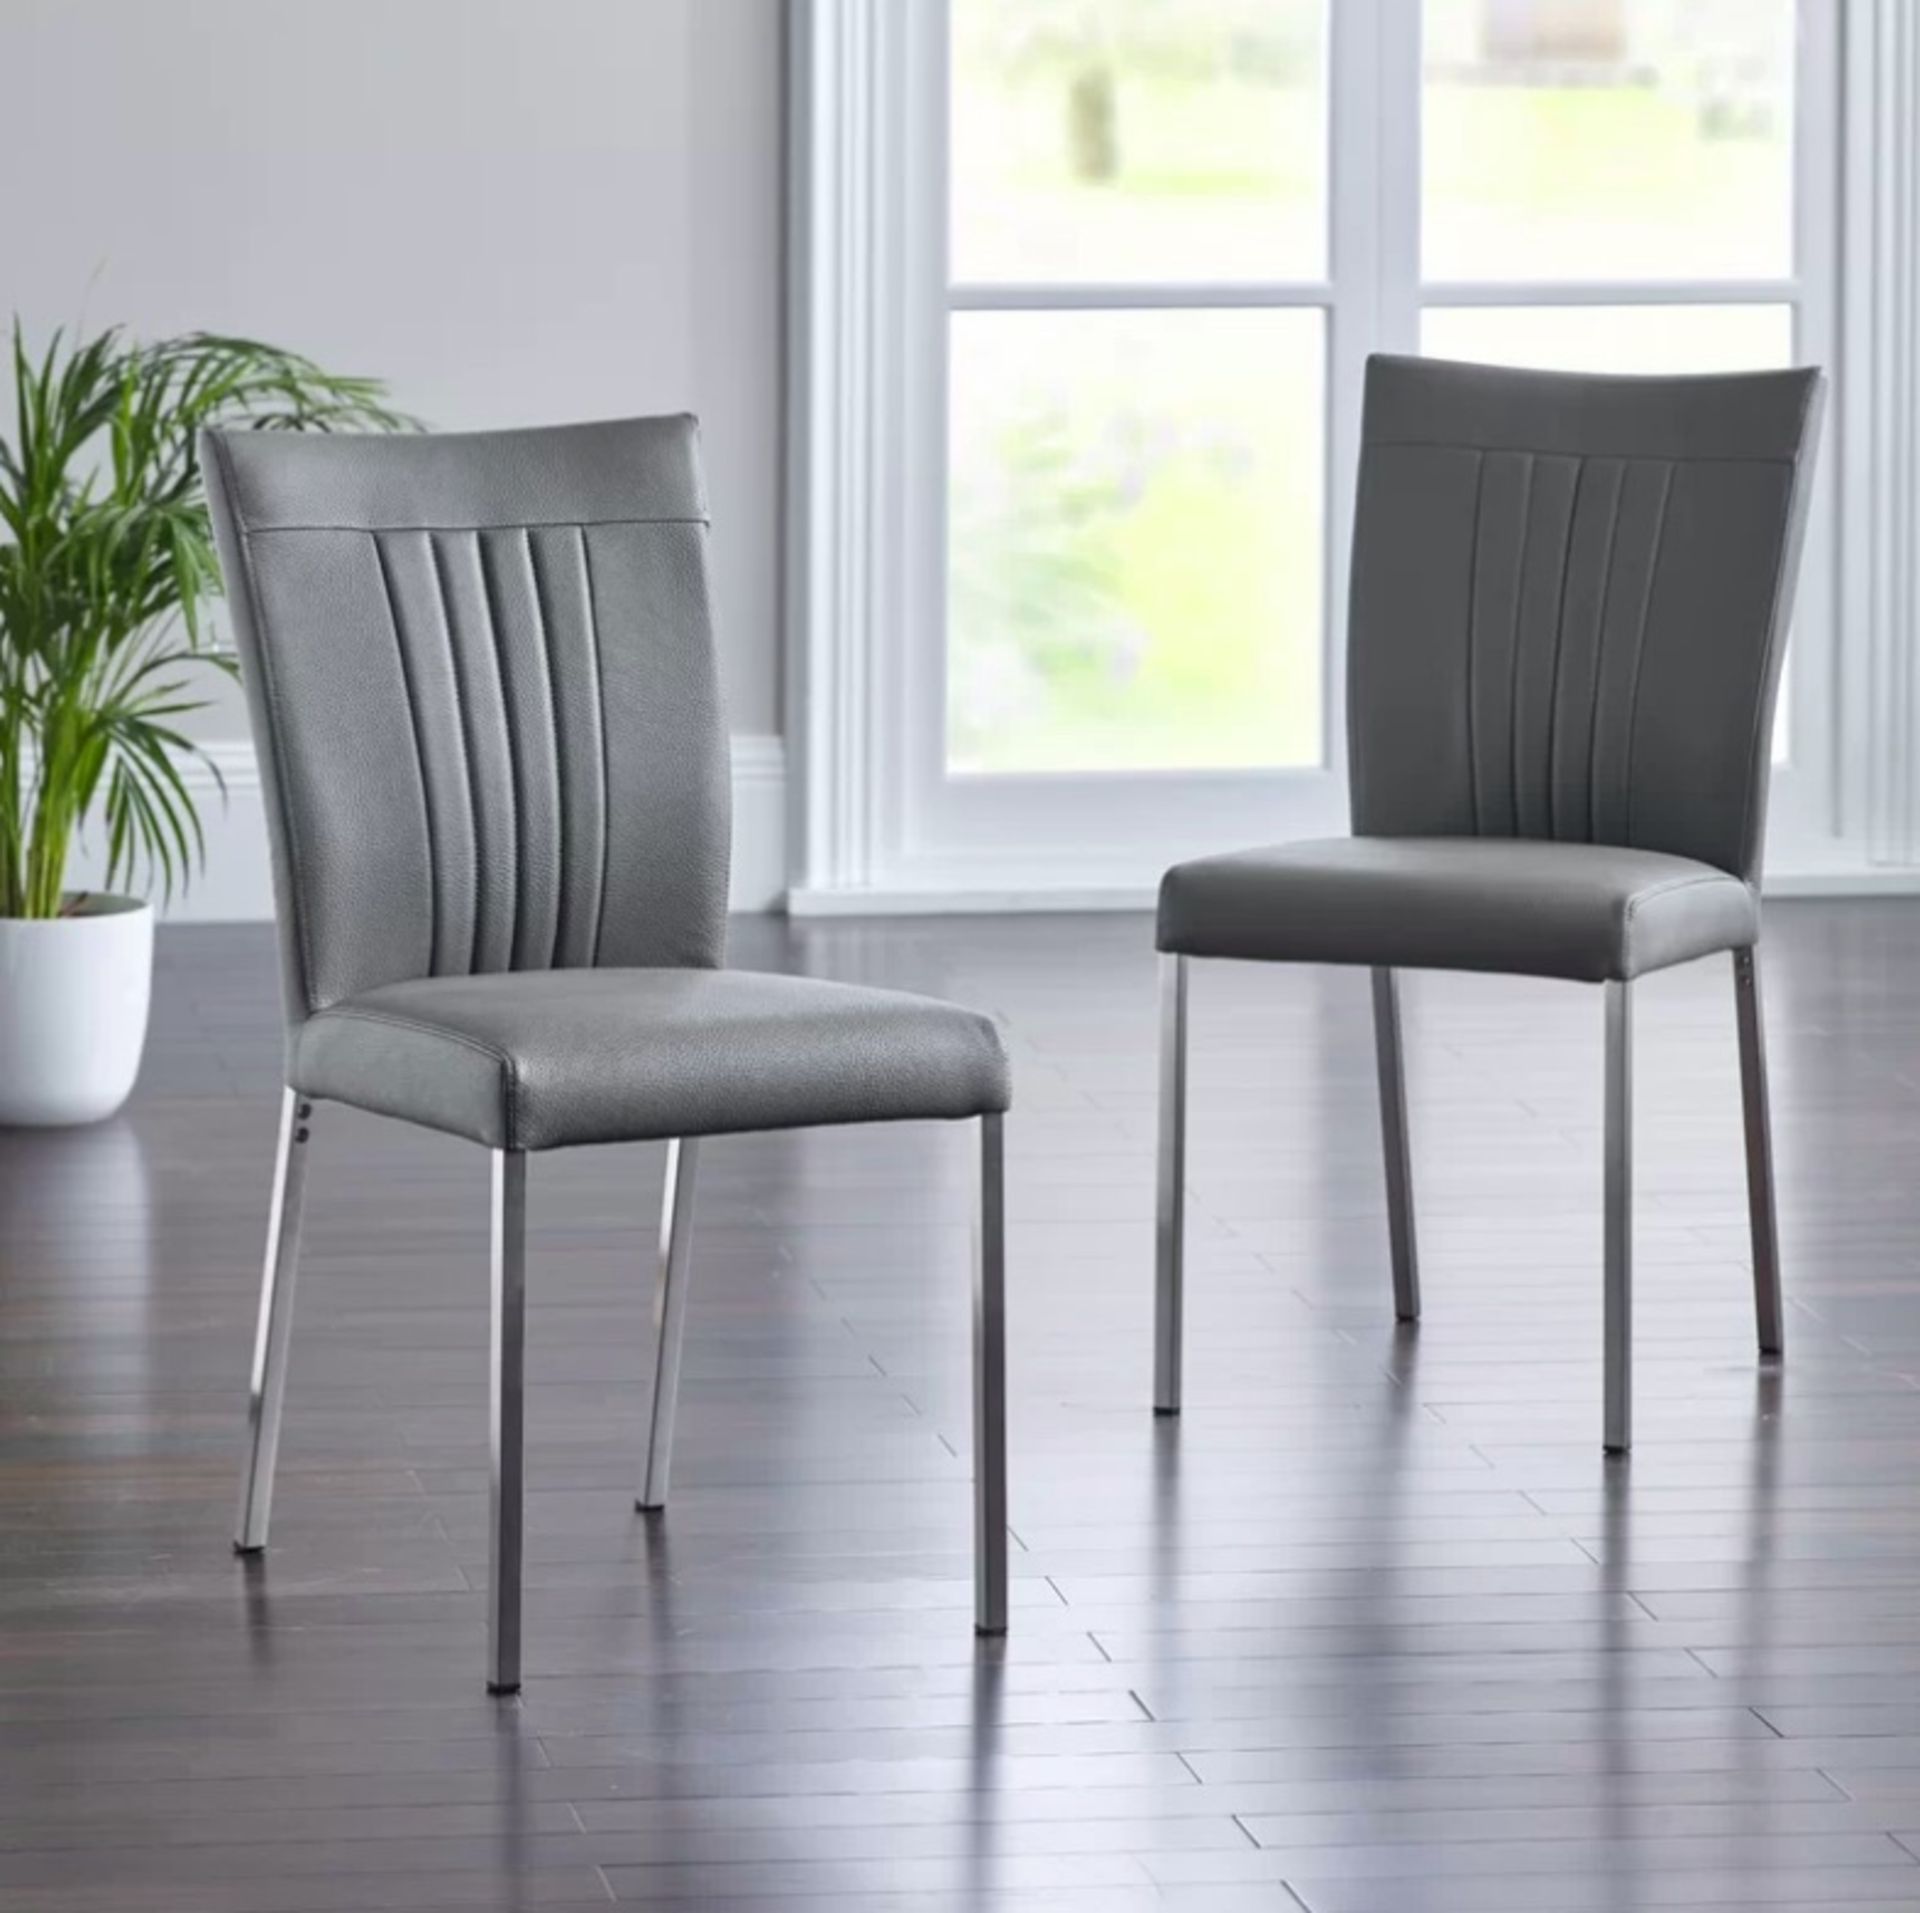 A Pair Grey Upholstered Dining Chair 2 X Chairs Supplied This Contemporary Grey Upholstered Dining